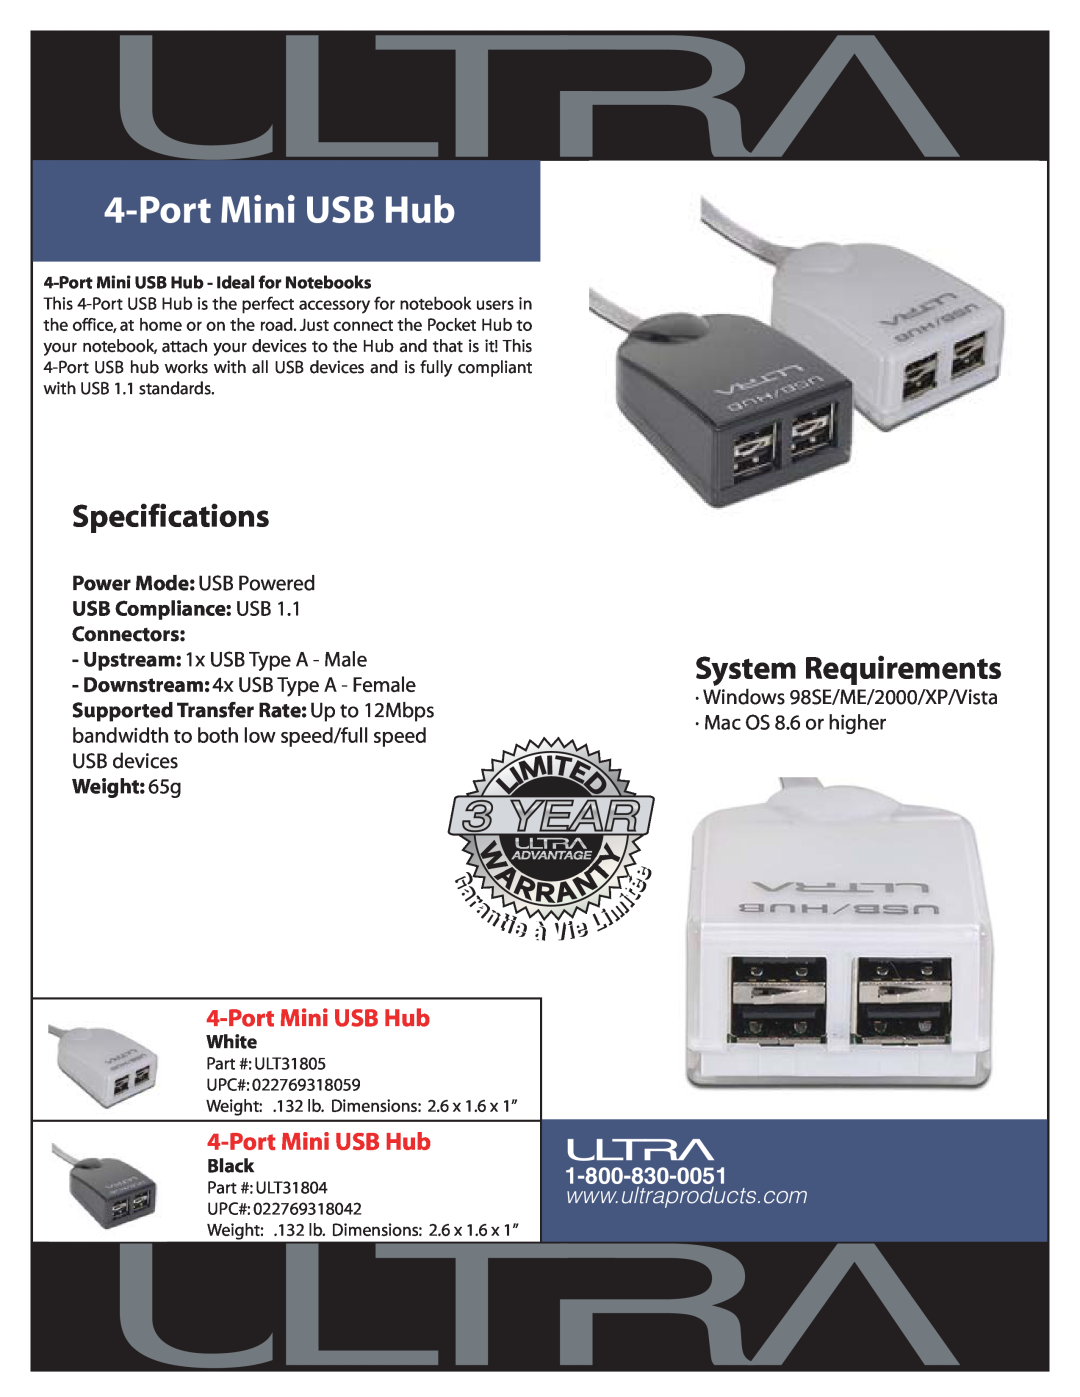 Ultra Products ULT31805 specifications Port Mini USB Hub, Specifications, System Requirements, USB devices, Weight 65g 